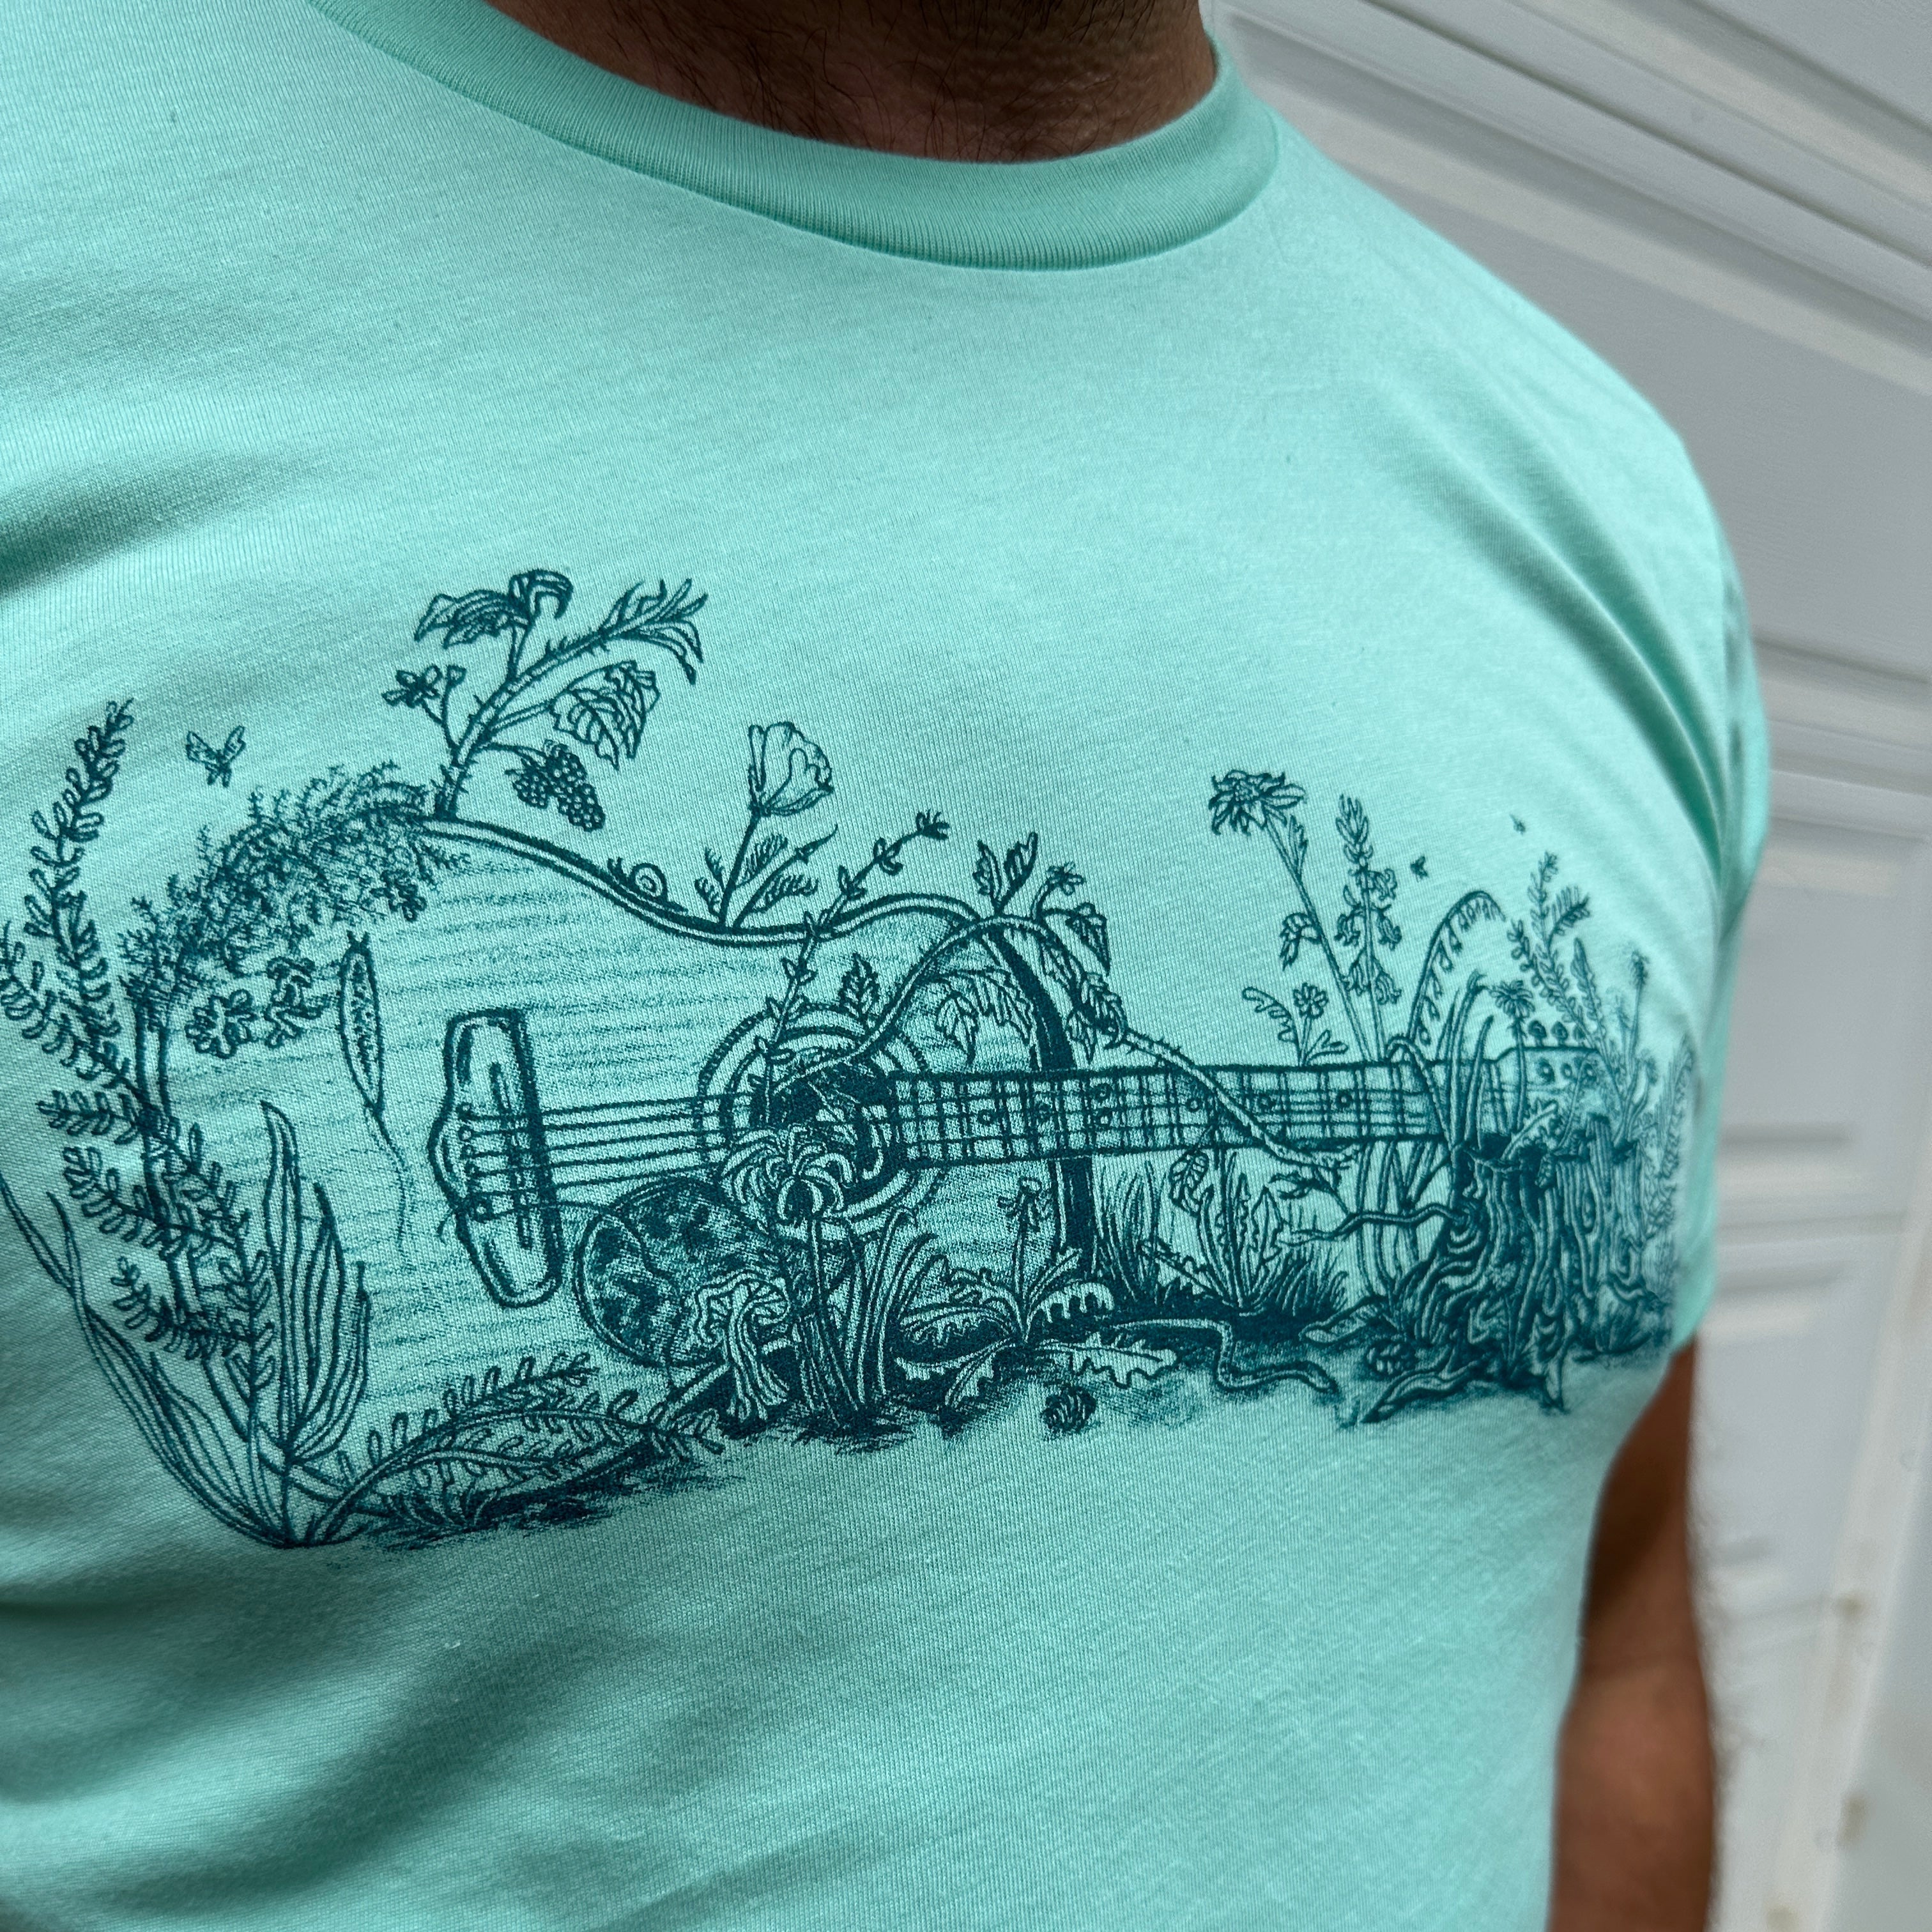 A drawing of a guitar on its side, overgrown with plants, printed in black ink on a light green t shirt.